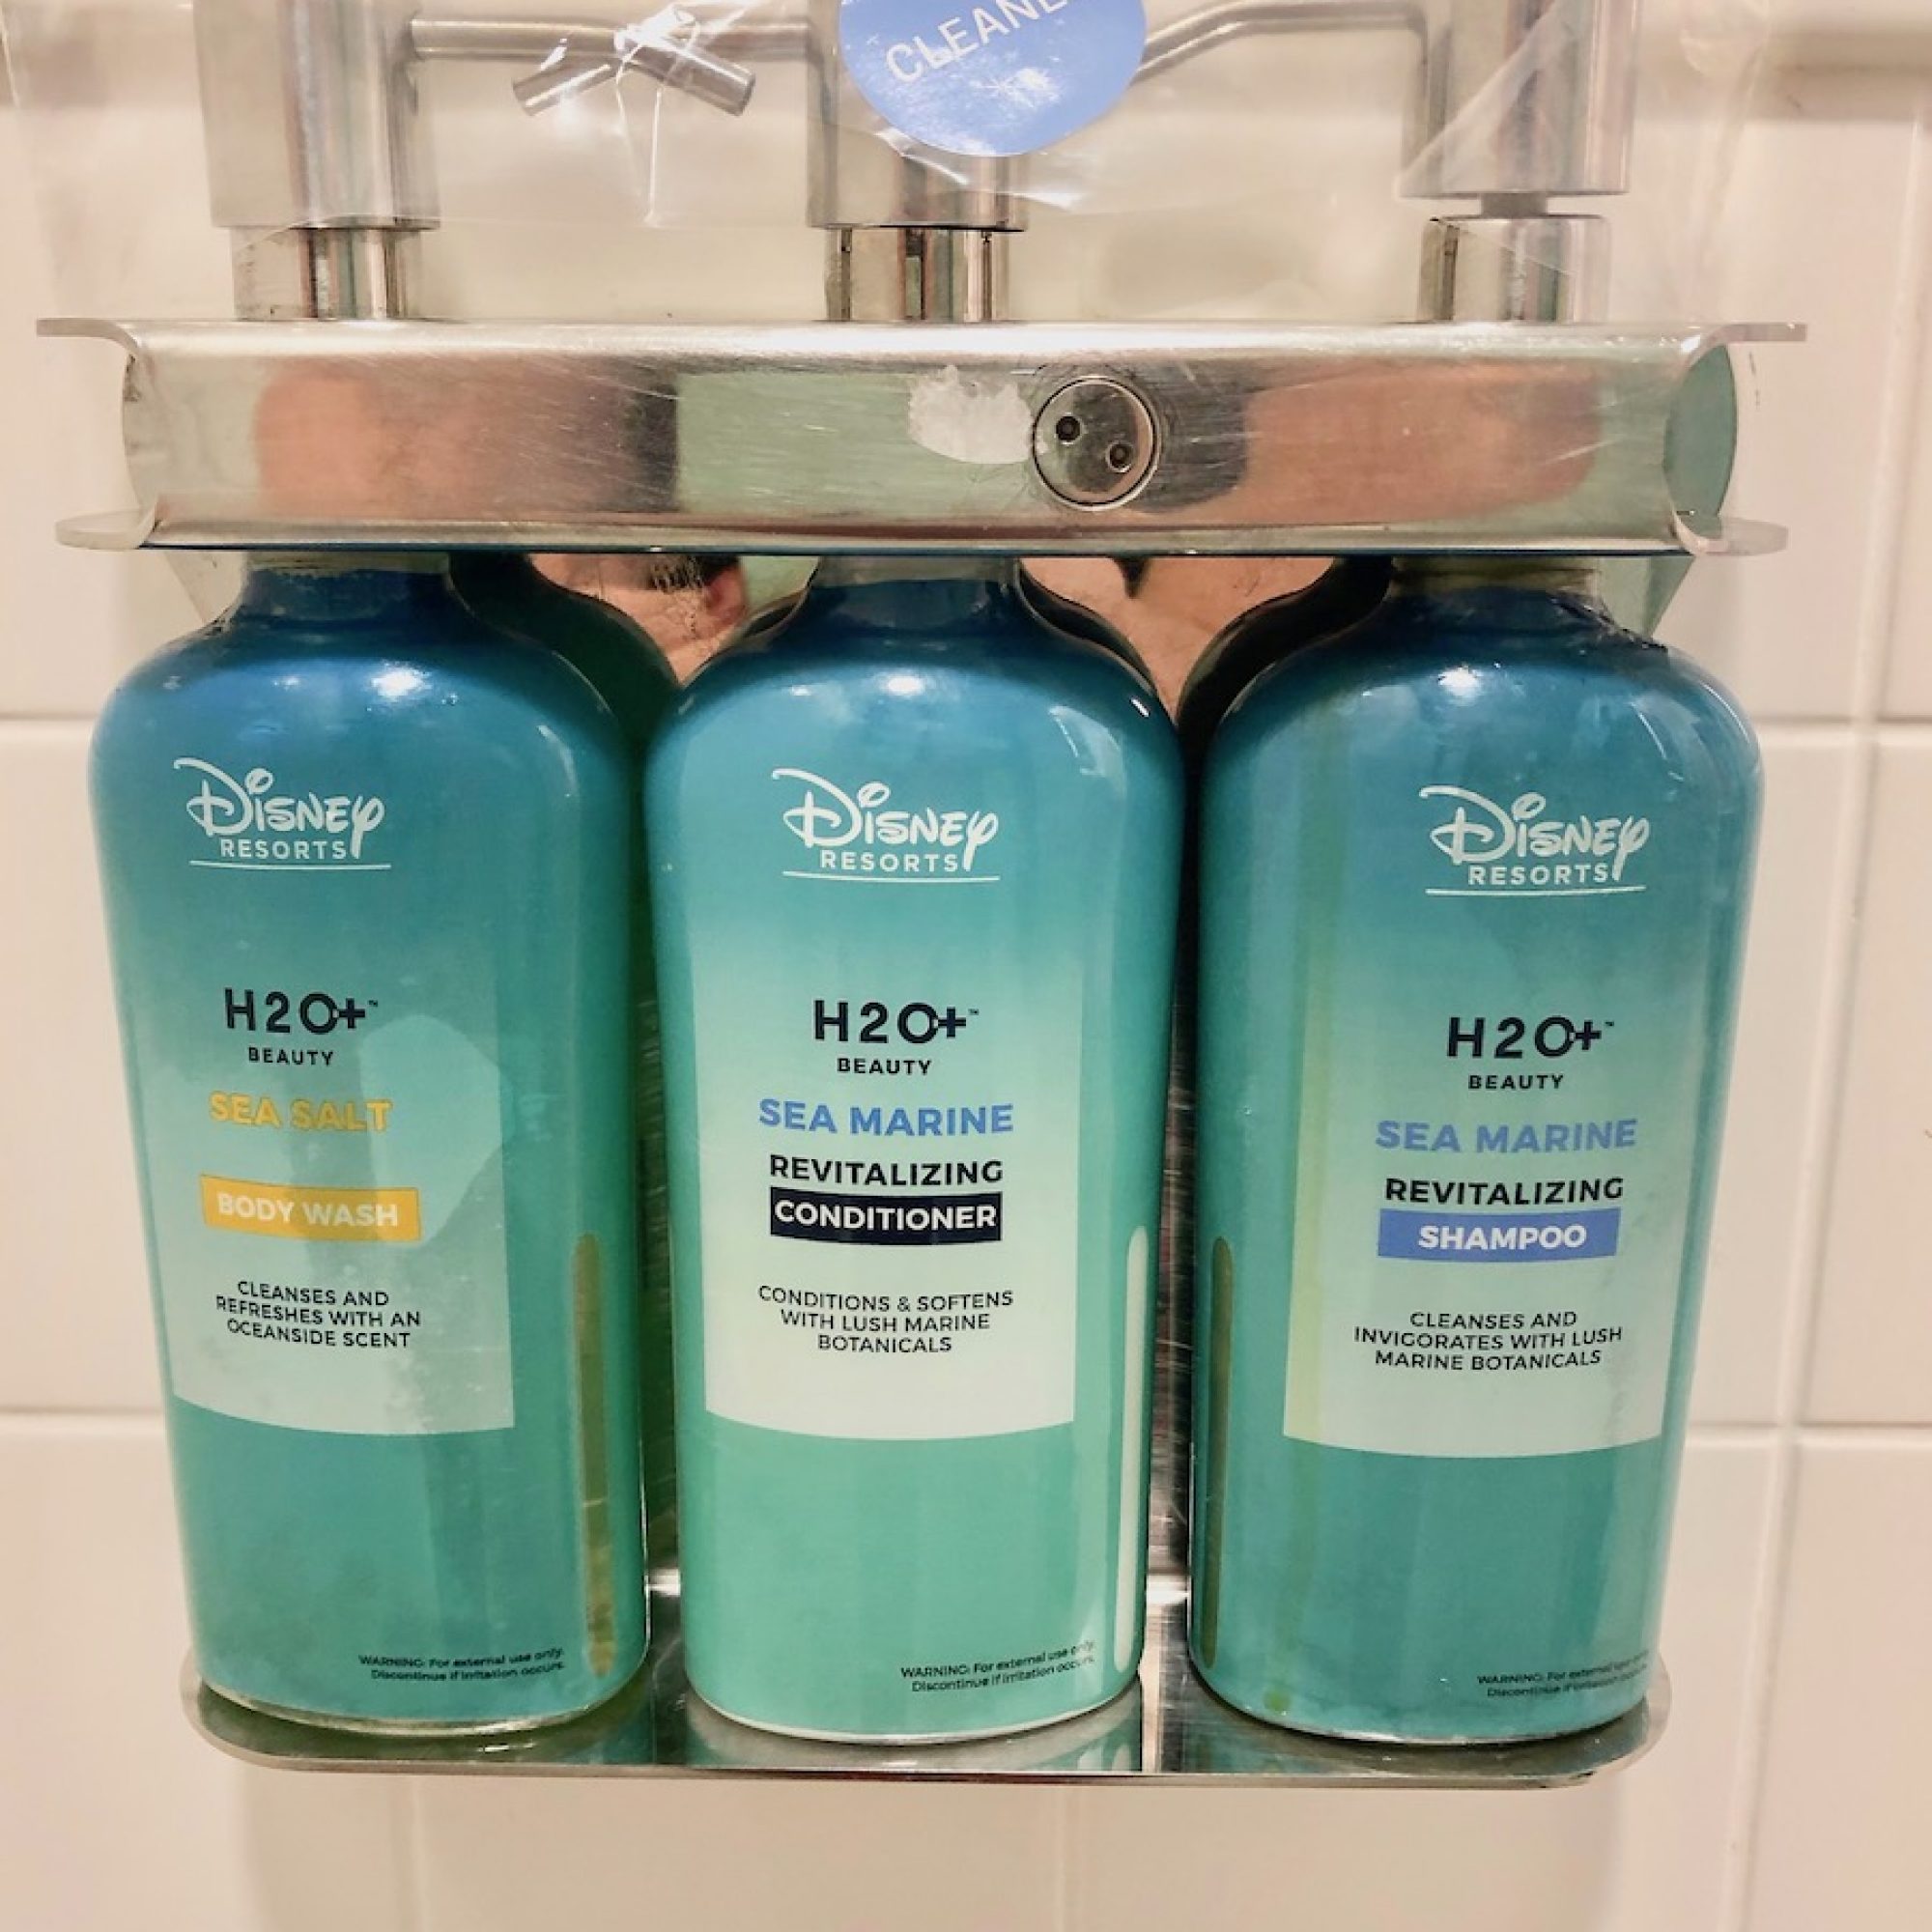 Complimentary H20 Products are available in all of the Resorts